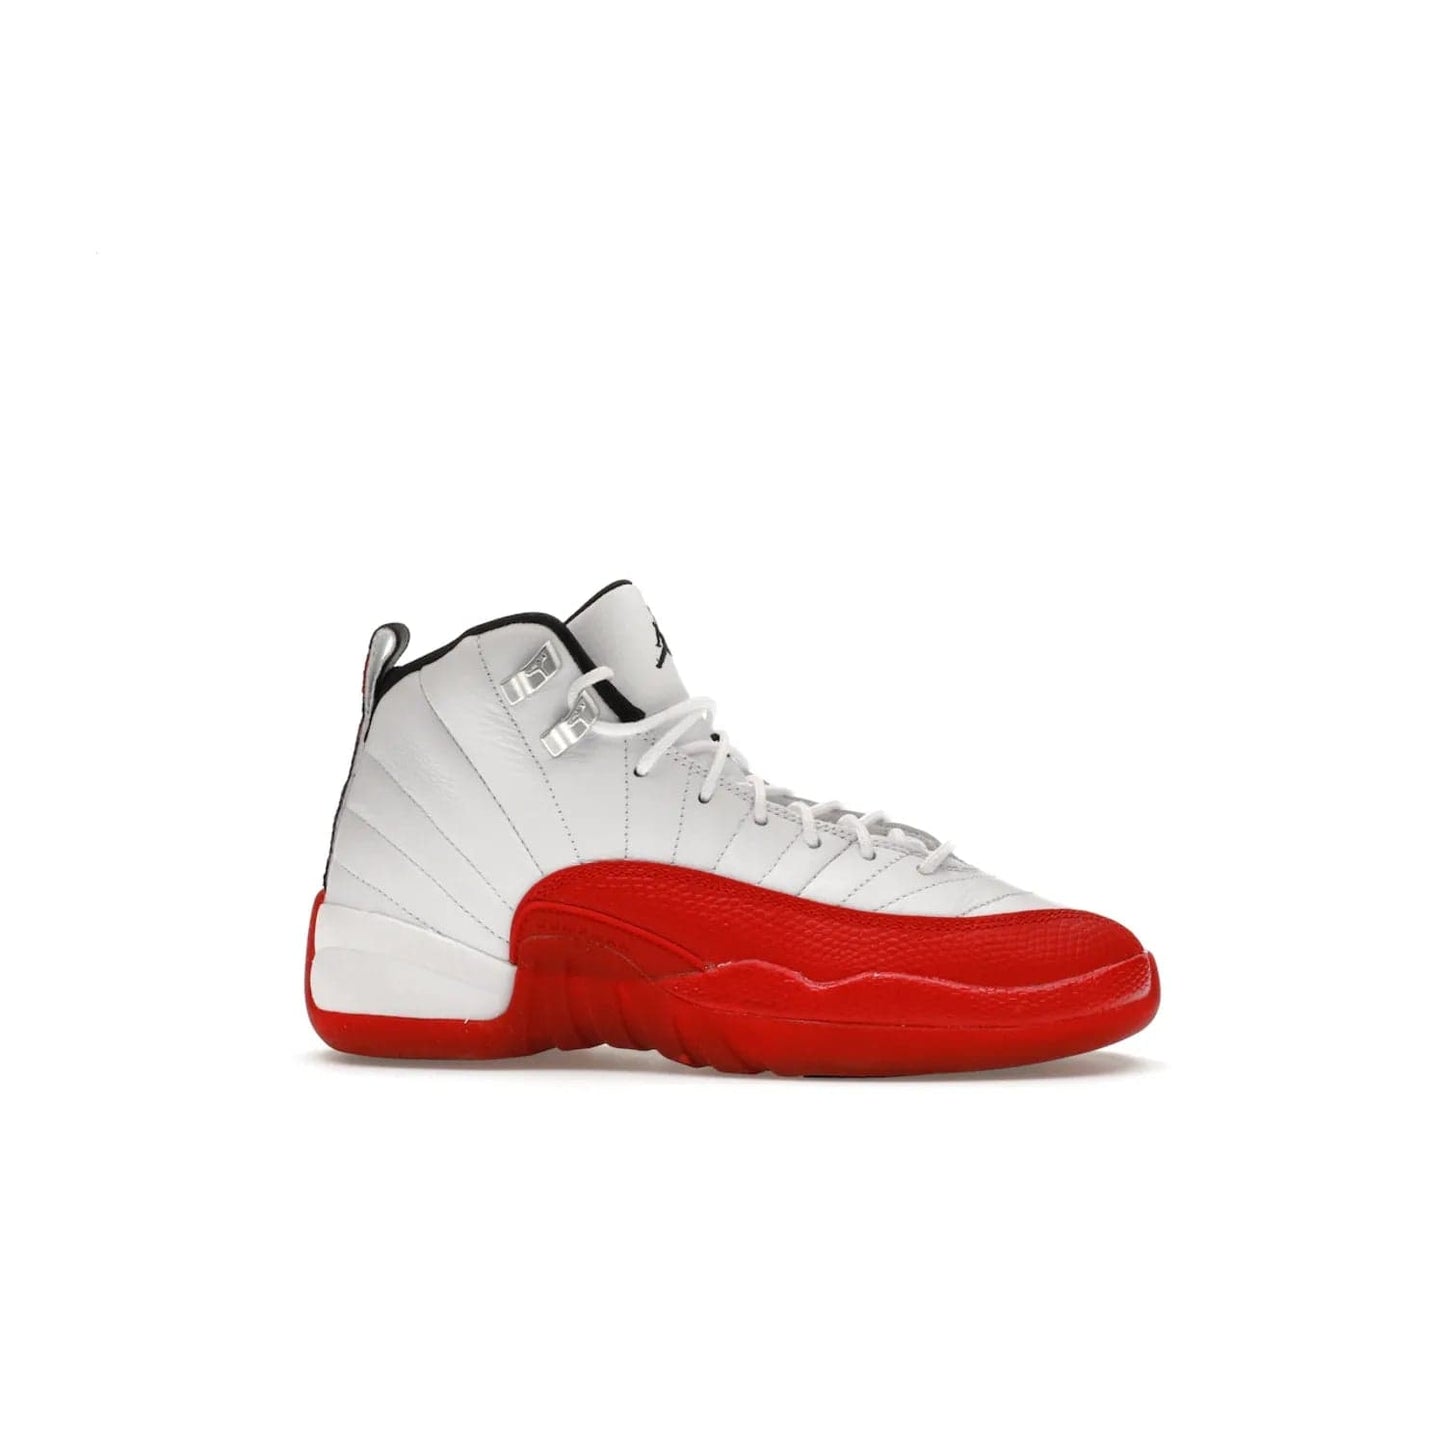 Jordan 12 Retro Cherry (2023) (GS) - Image 2 - Only at www.BallersClubKickz.com - Grab the Jordan 12 Retro Cherry (2023) (GS) and show off your signature style with these iconic kicks. Dressed in White, Black and Varsity Red, these timeless kicks are sure to turn heads. Available October 28, 2023.